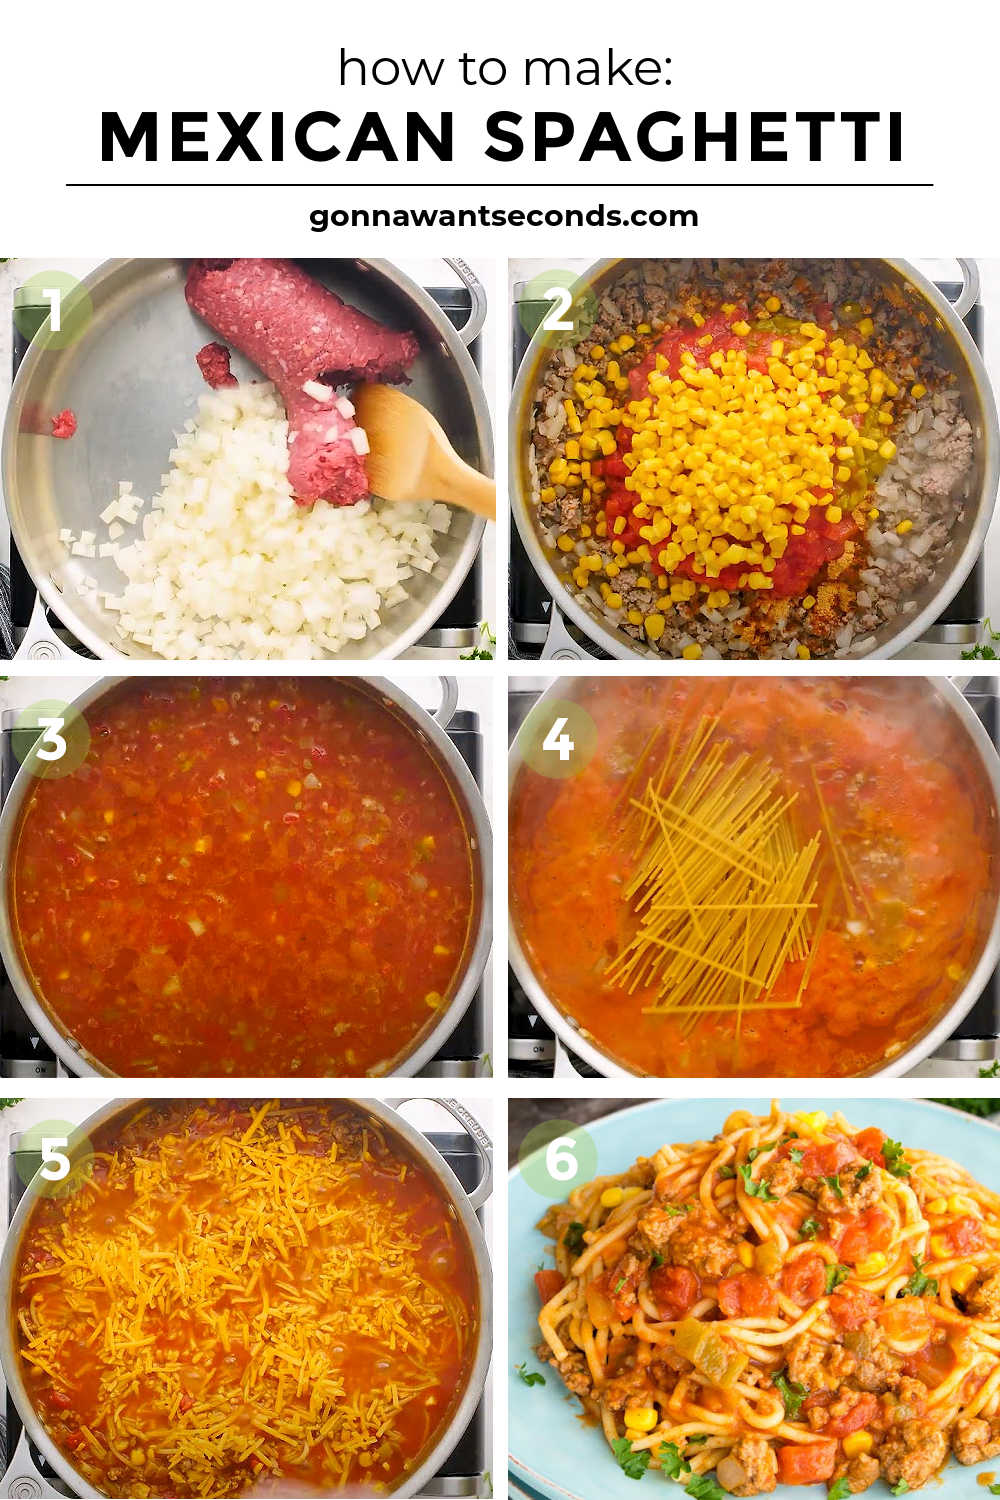 step by step how to make mexican spaghetti